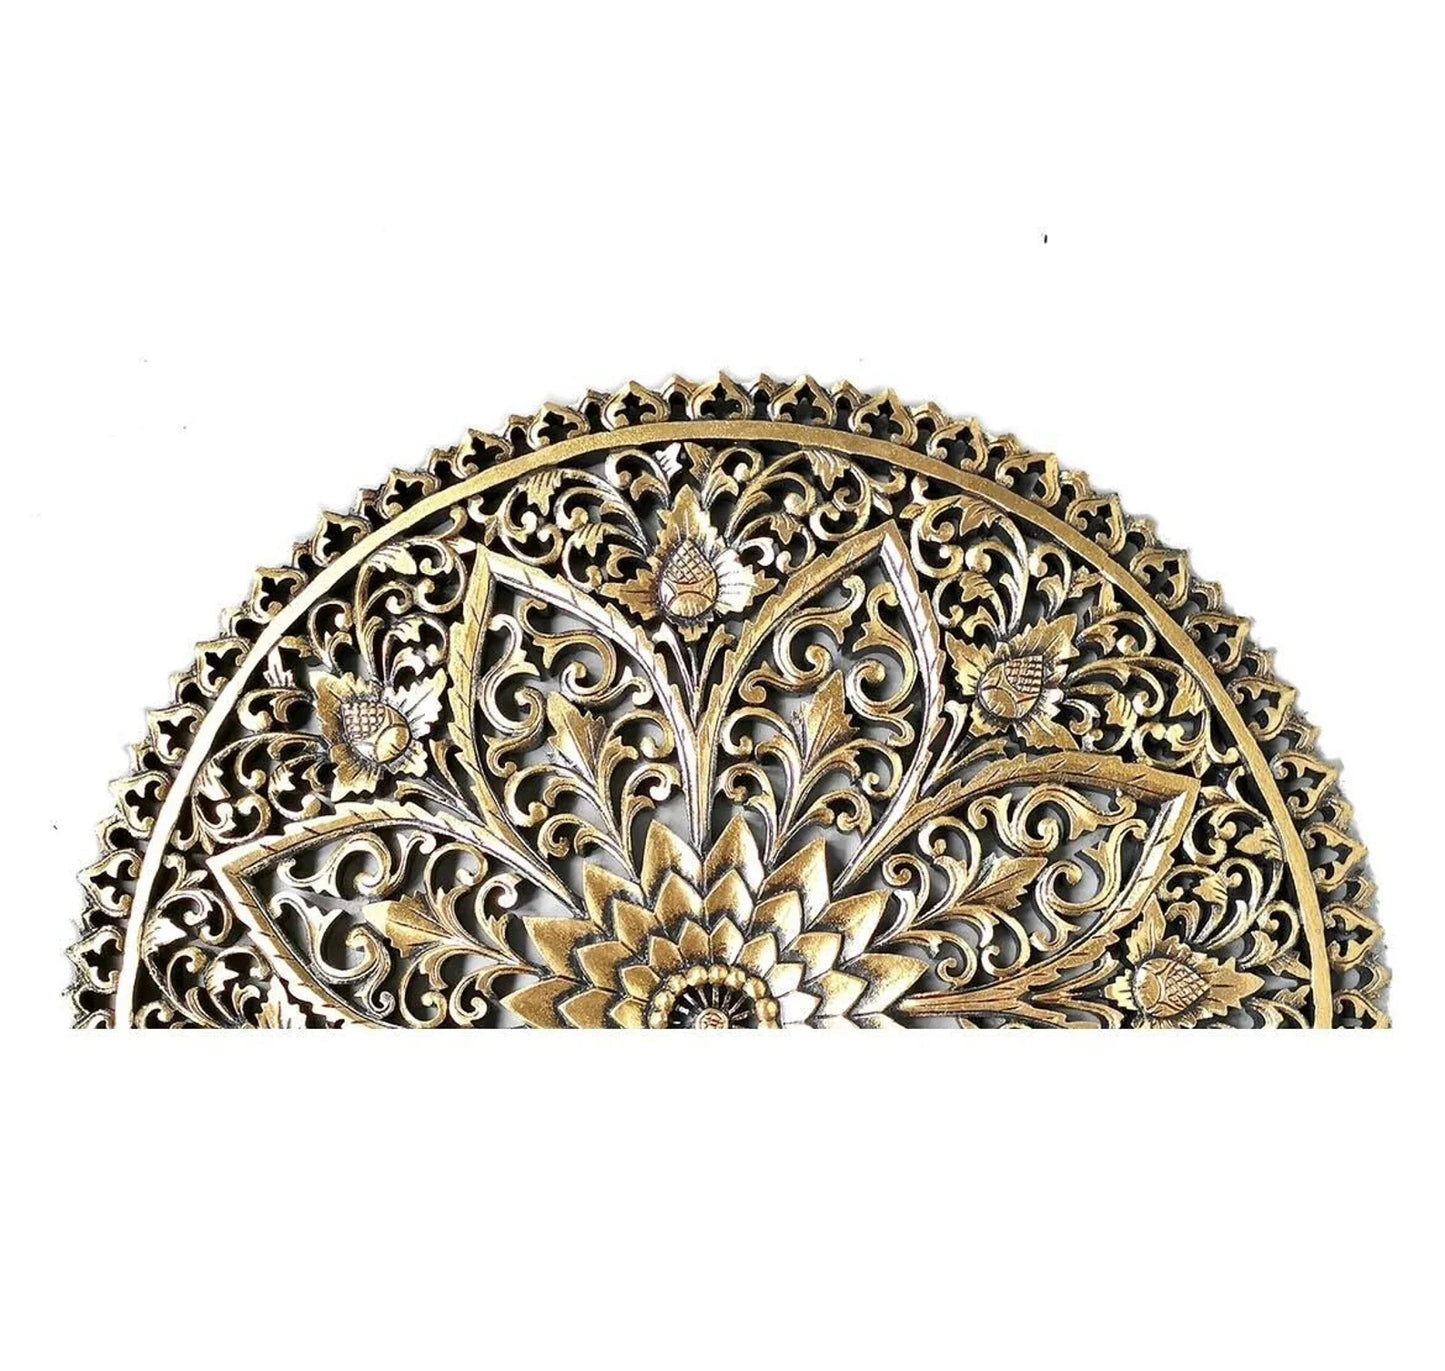 Hand carved King Size Half-moon Mandala Bed headboard 'Serupa' in Gold Antic - 72 inches